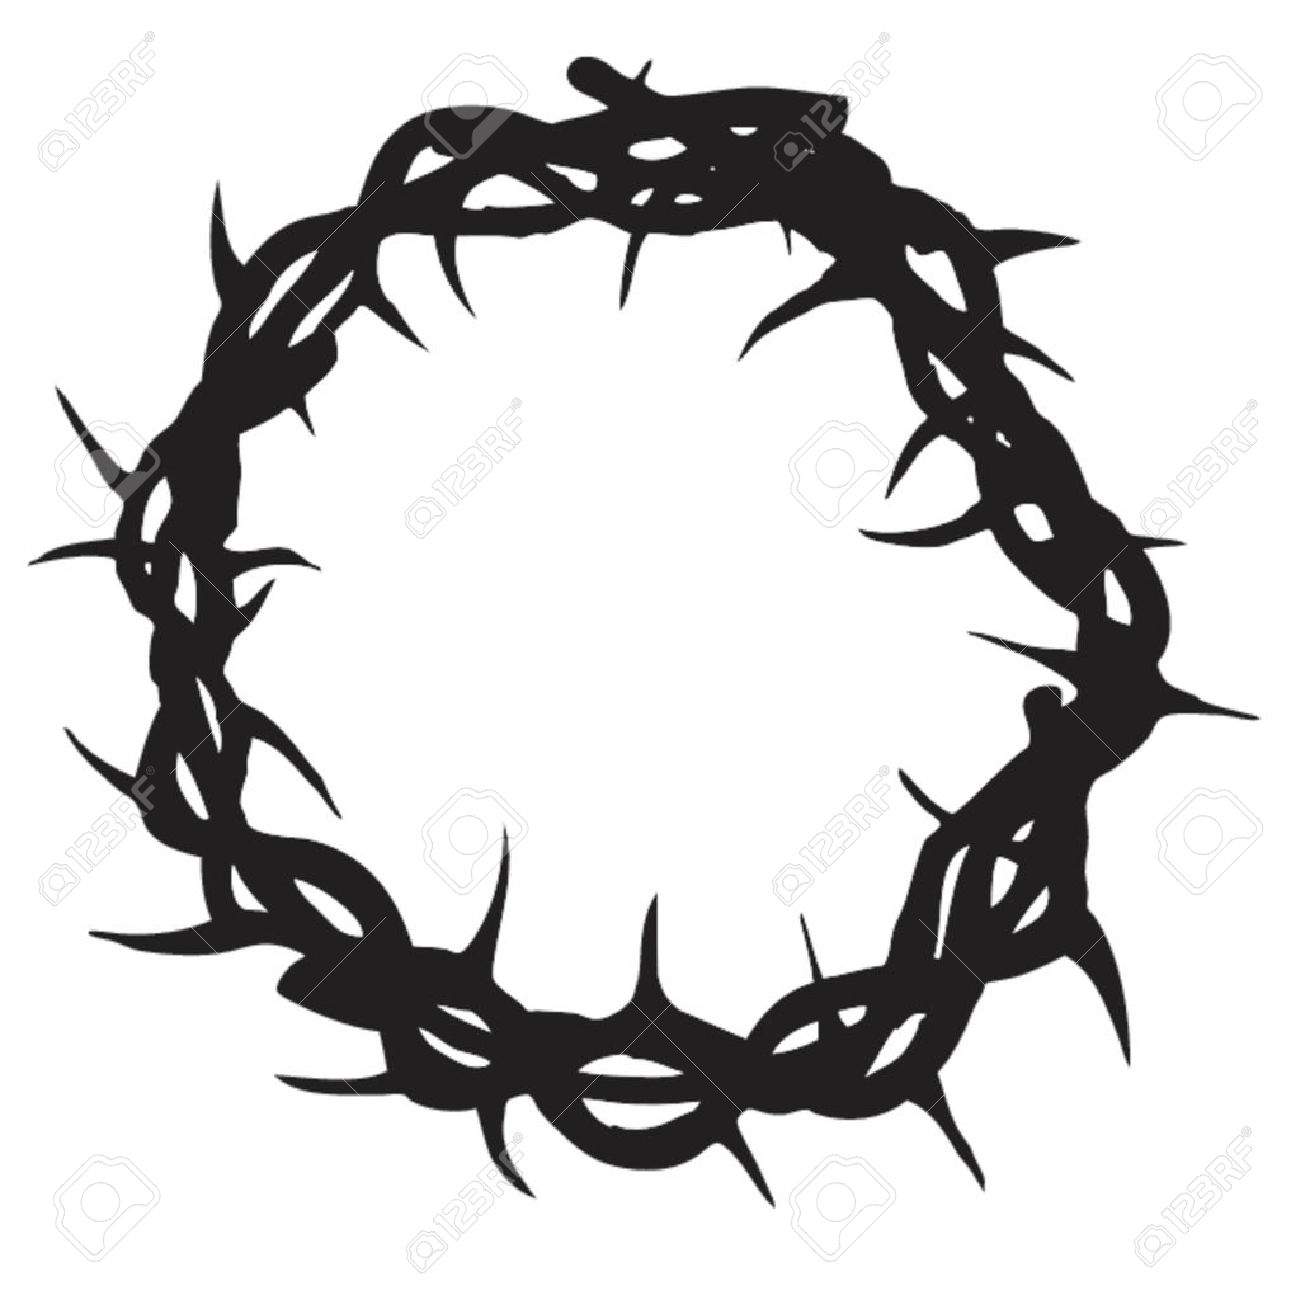 Thorns crown ring clipart top